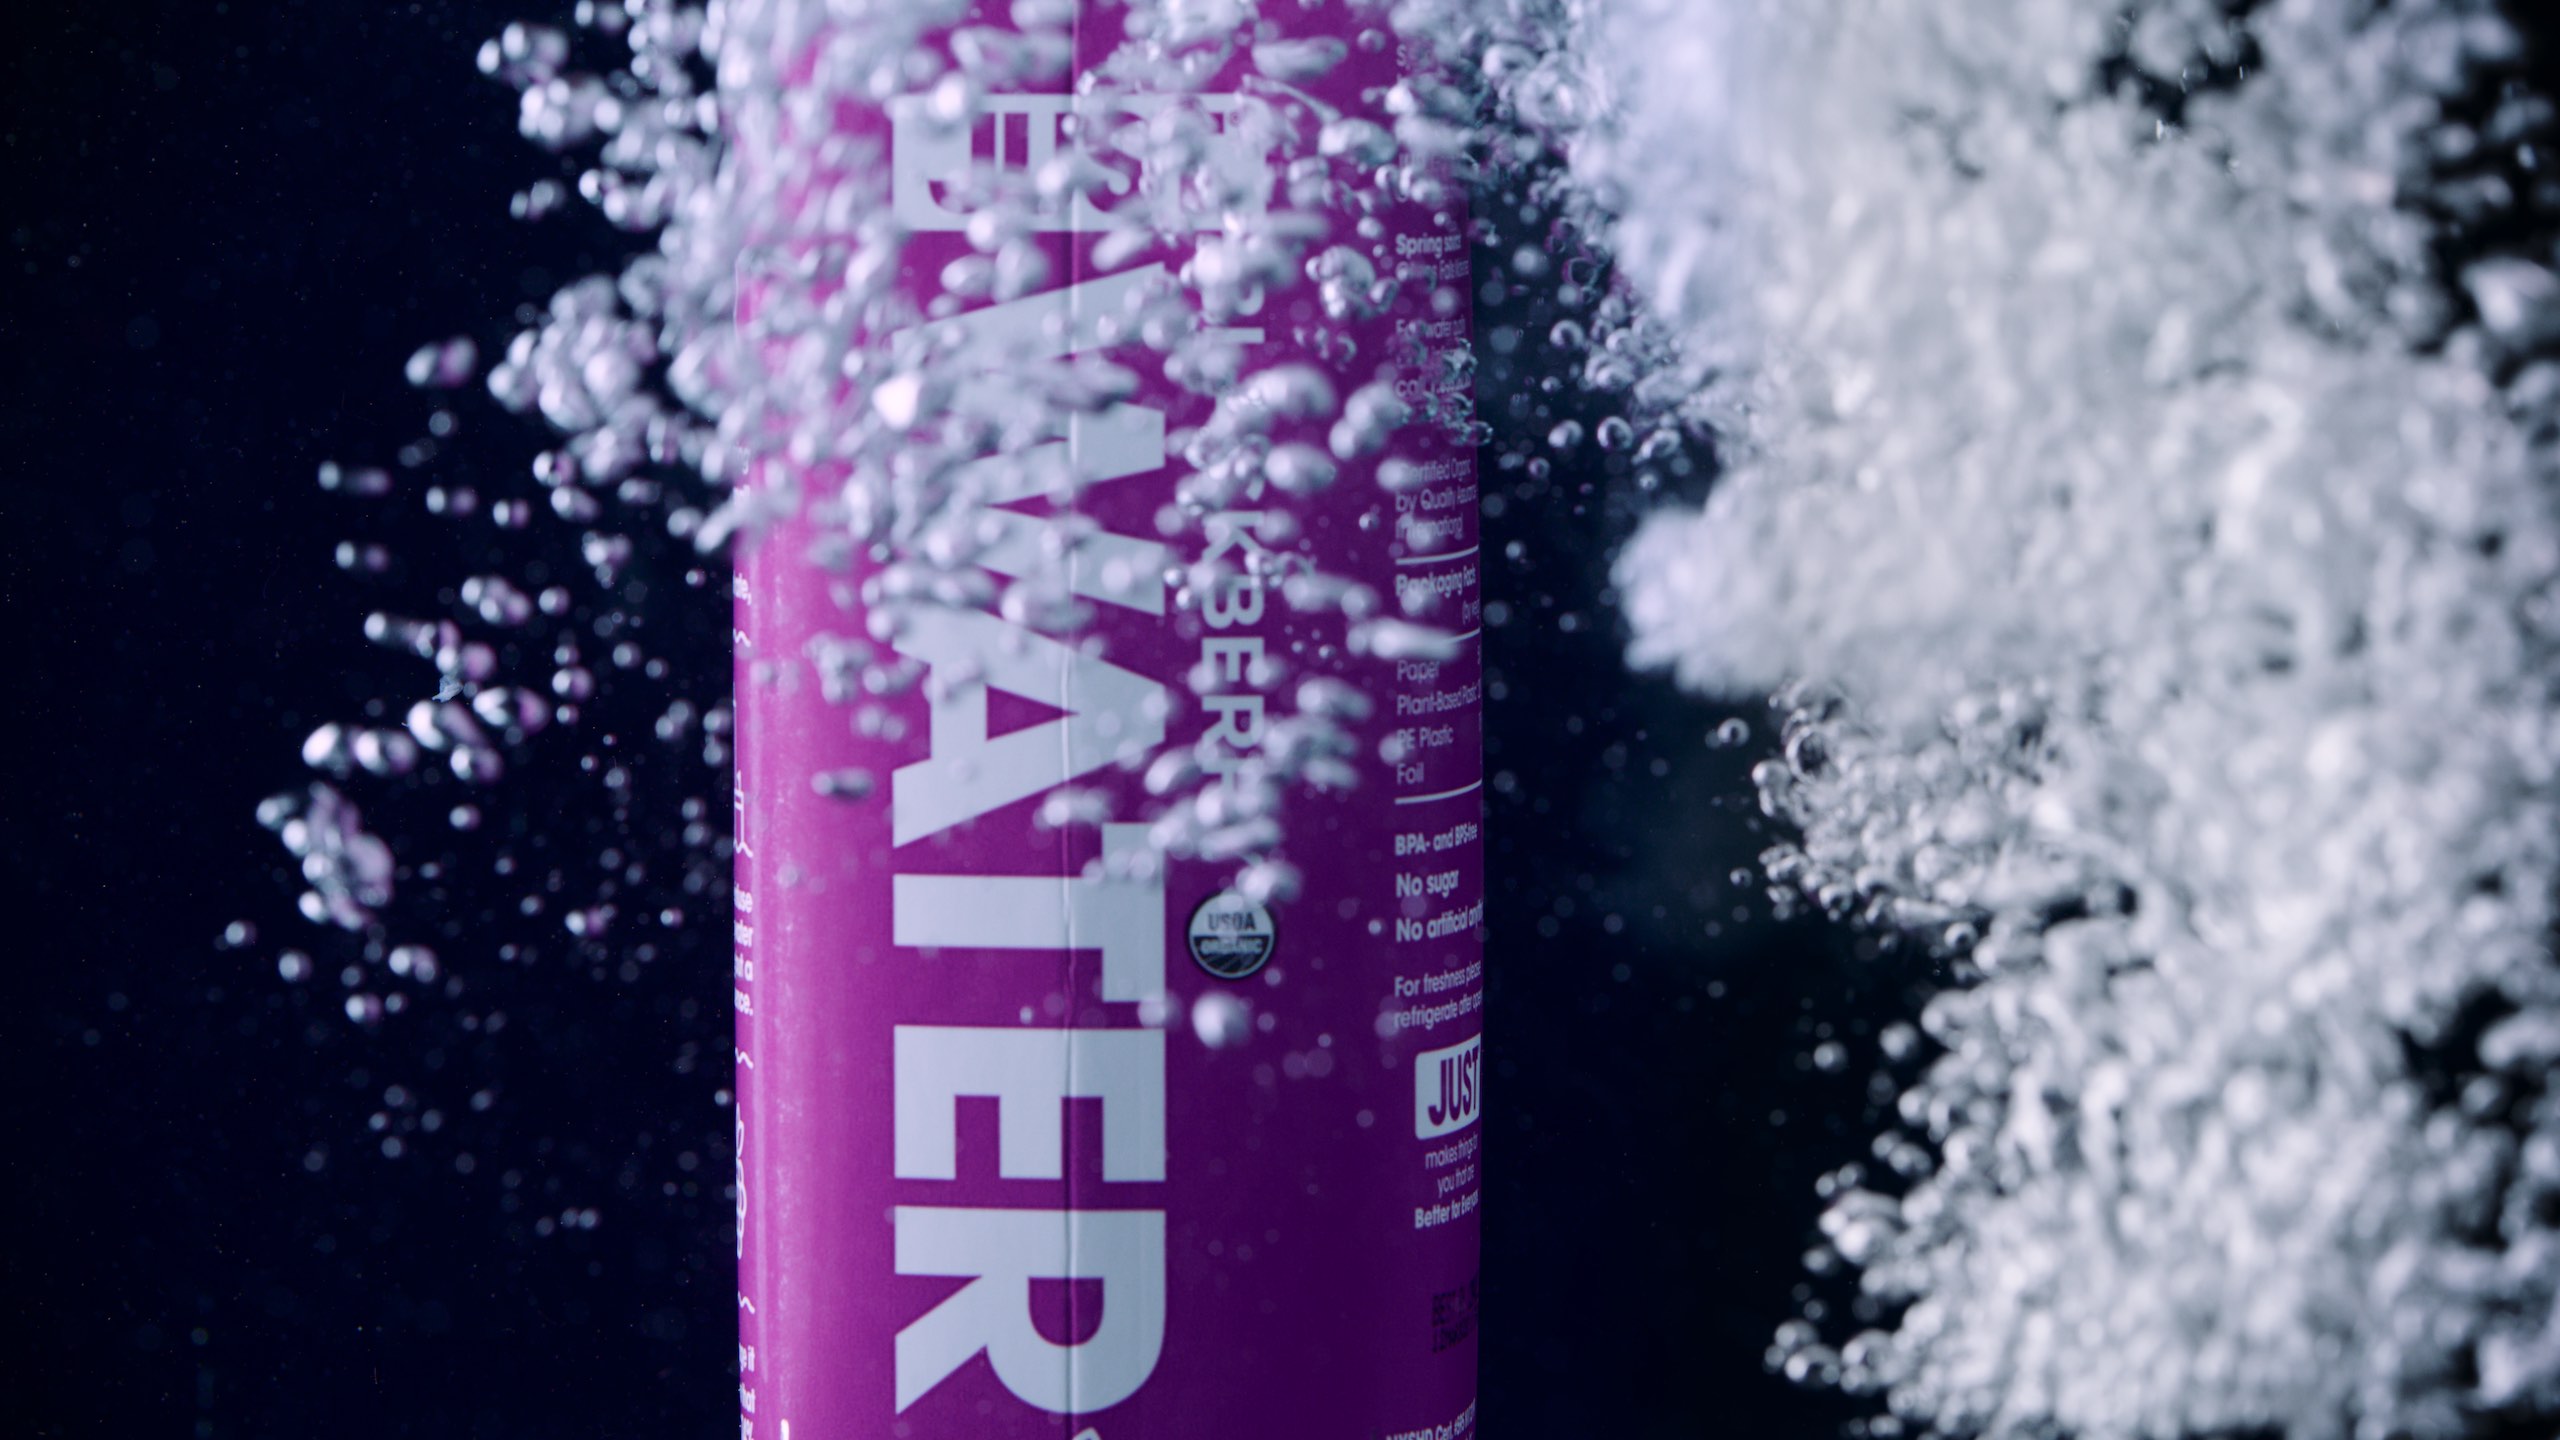 IU C&I Studios Portfolio Just water video ad Purple container of spring water on display with bubbles